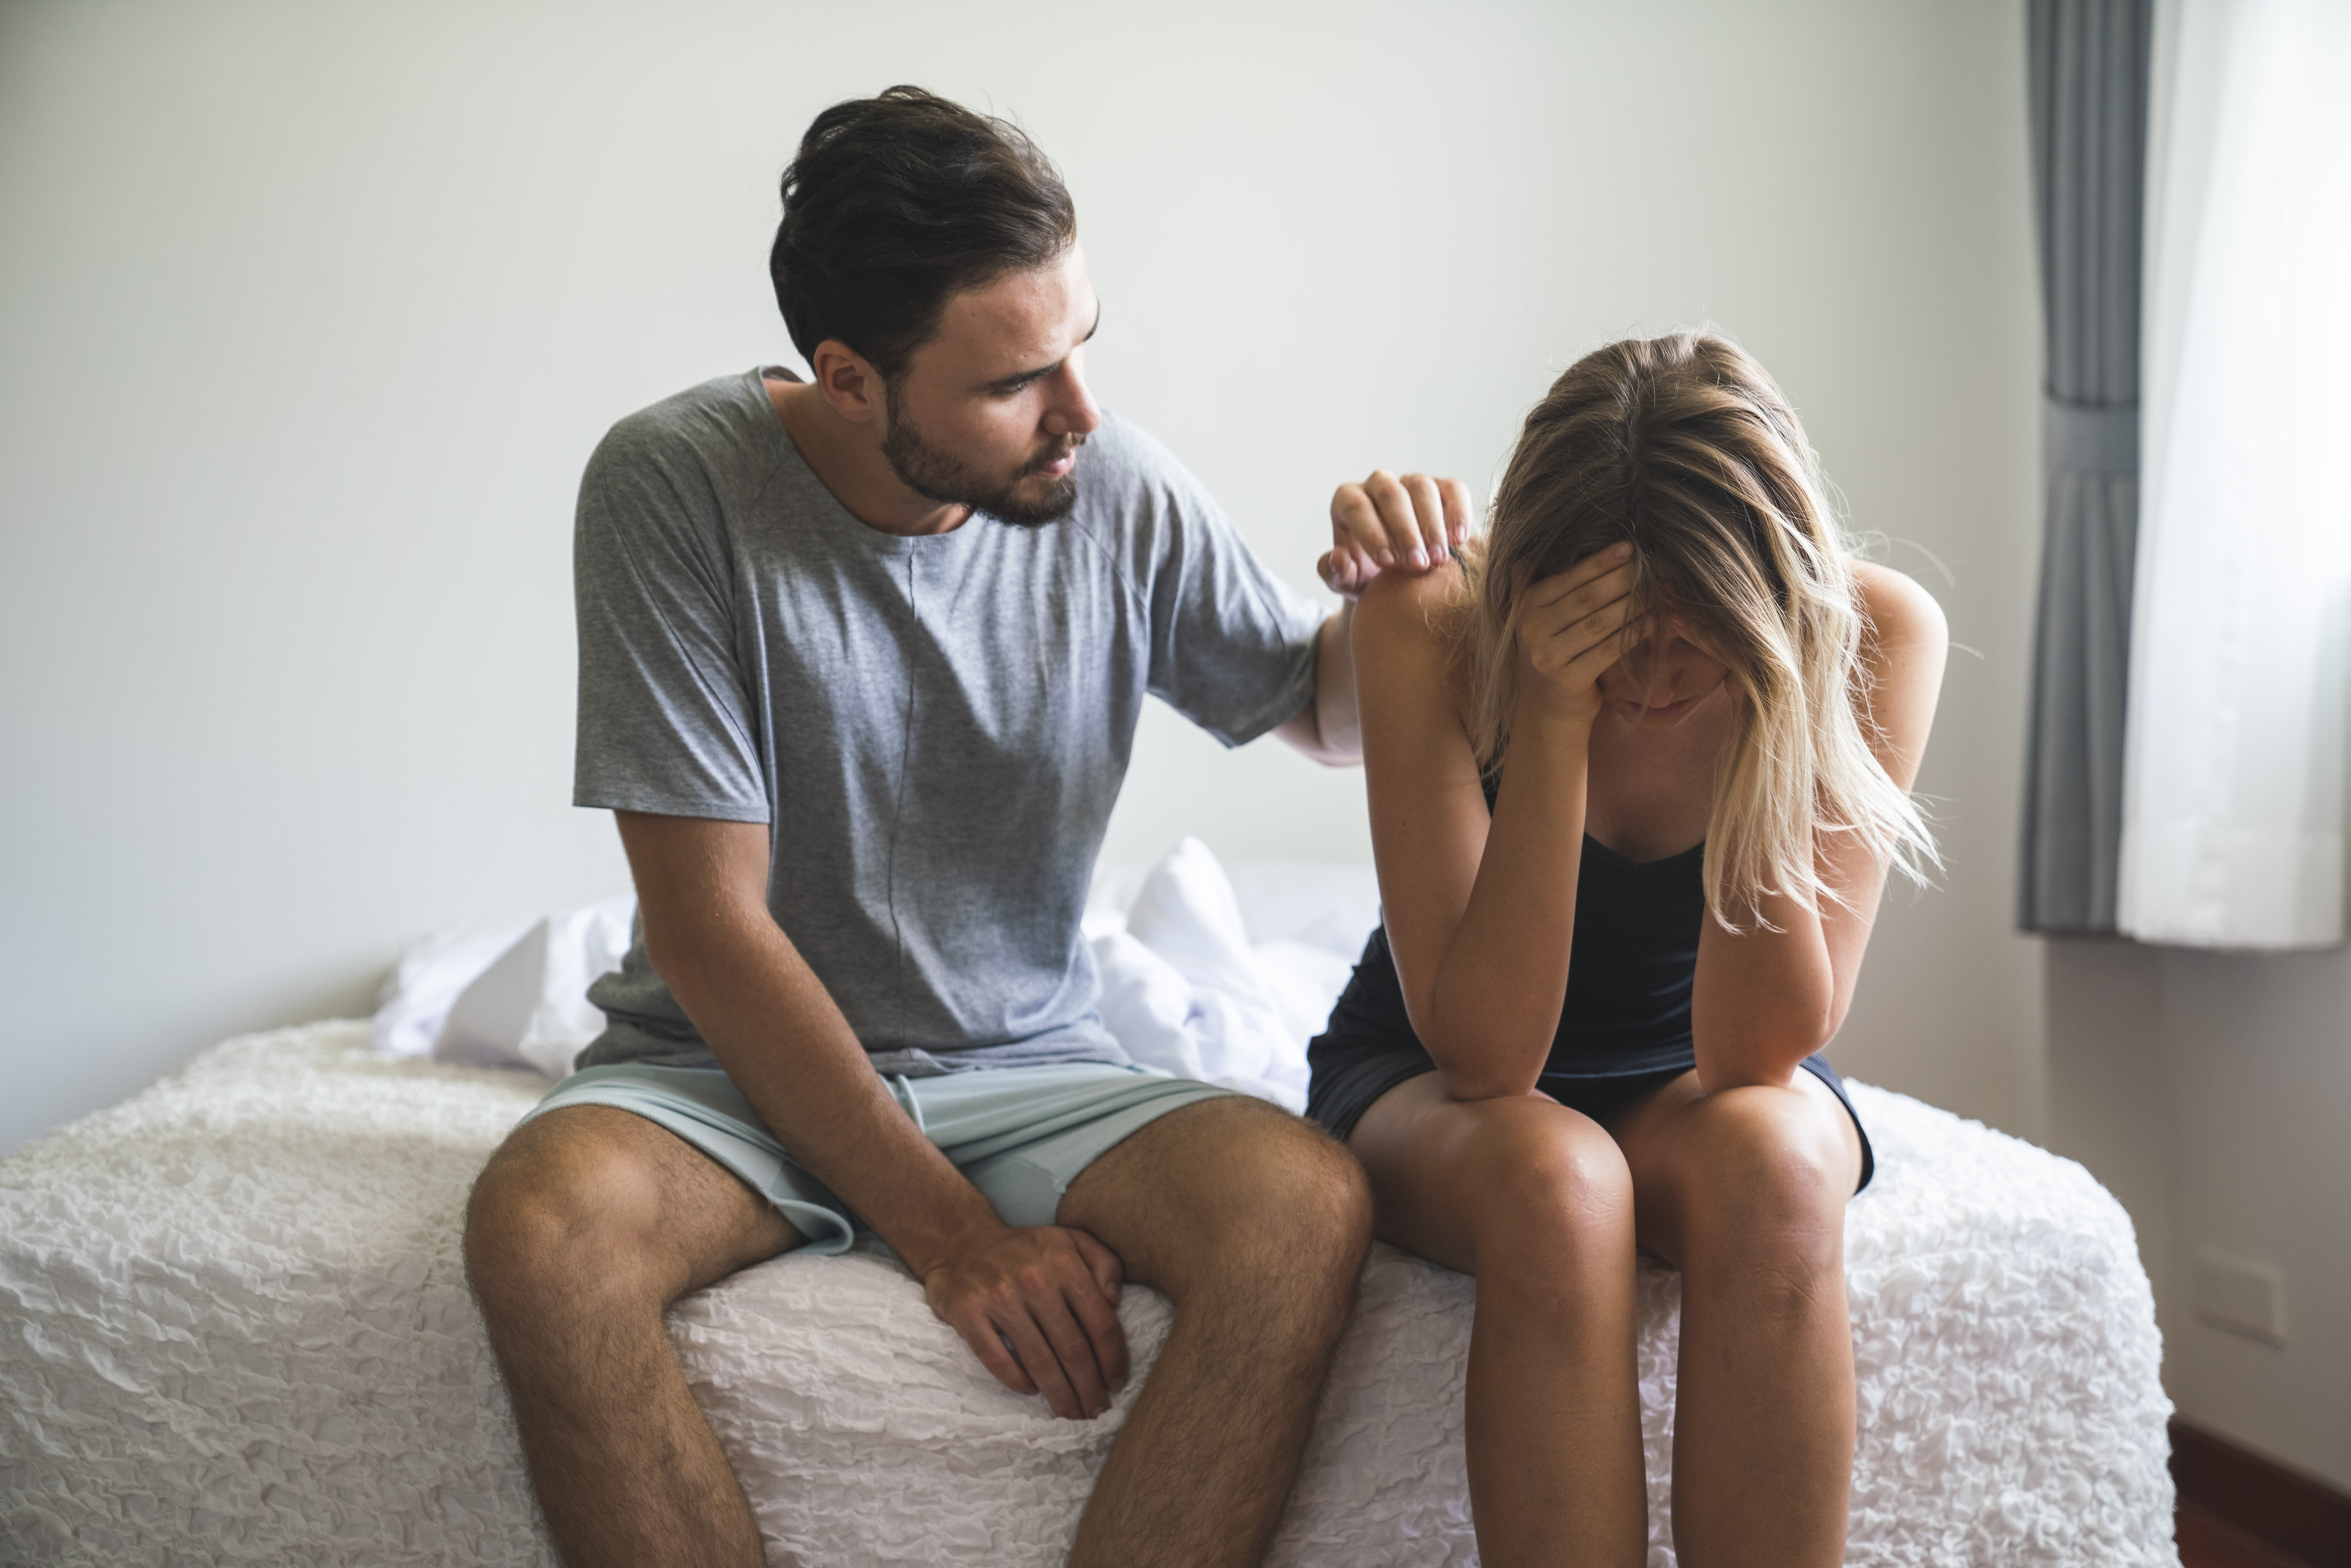 Woman upset while her boyfriend consoles her